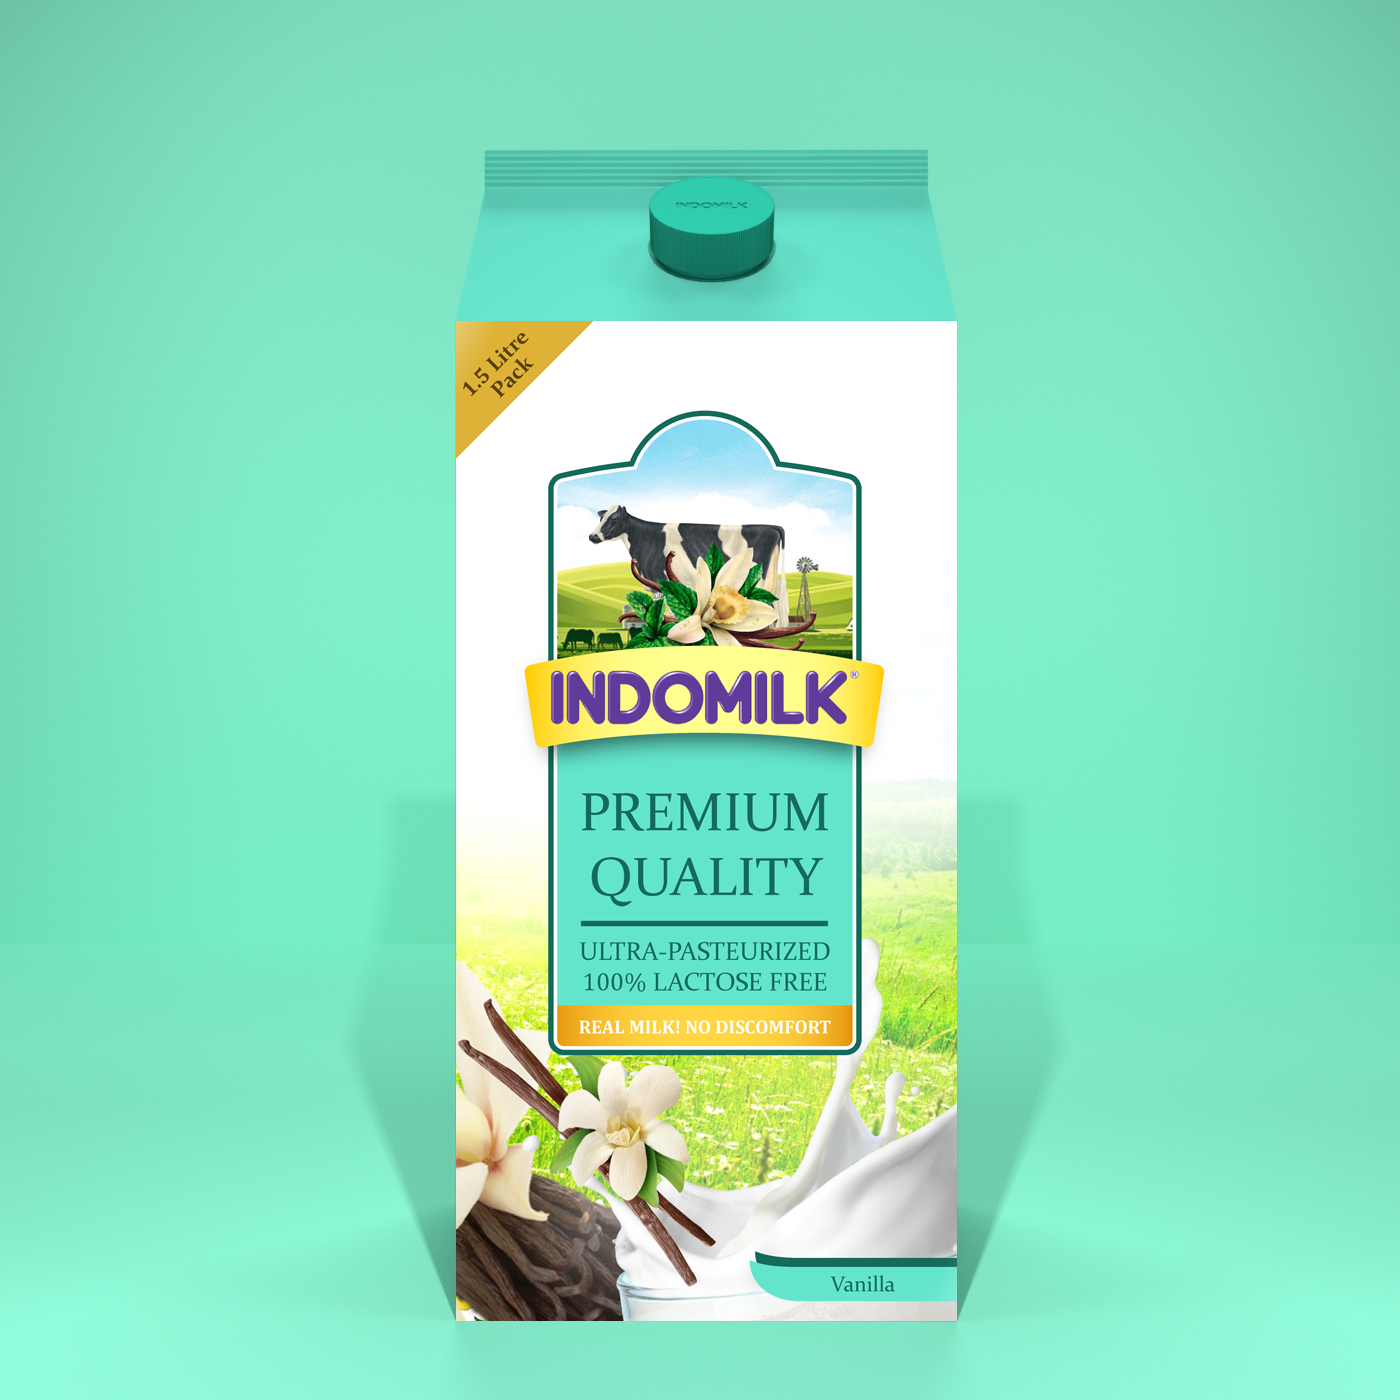 Packaging Product Branding Industrial Product milk packaging milk box packaging 1.5 litre box box packaging